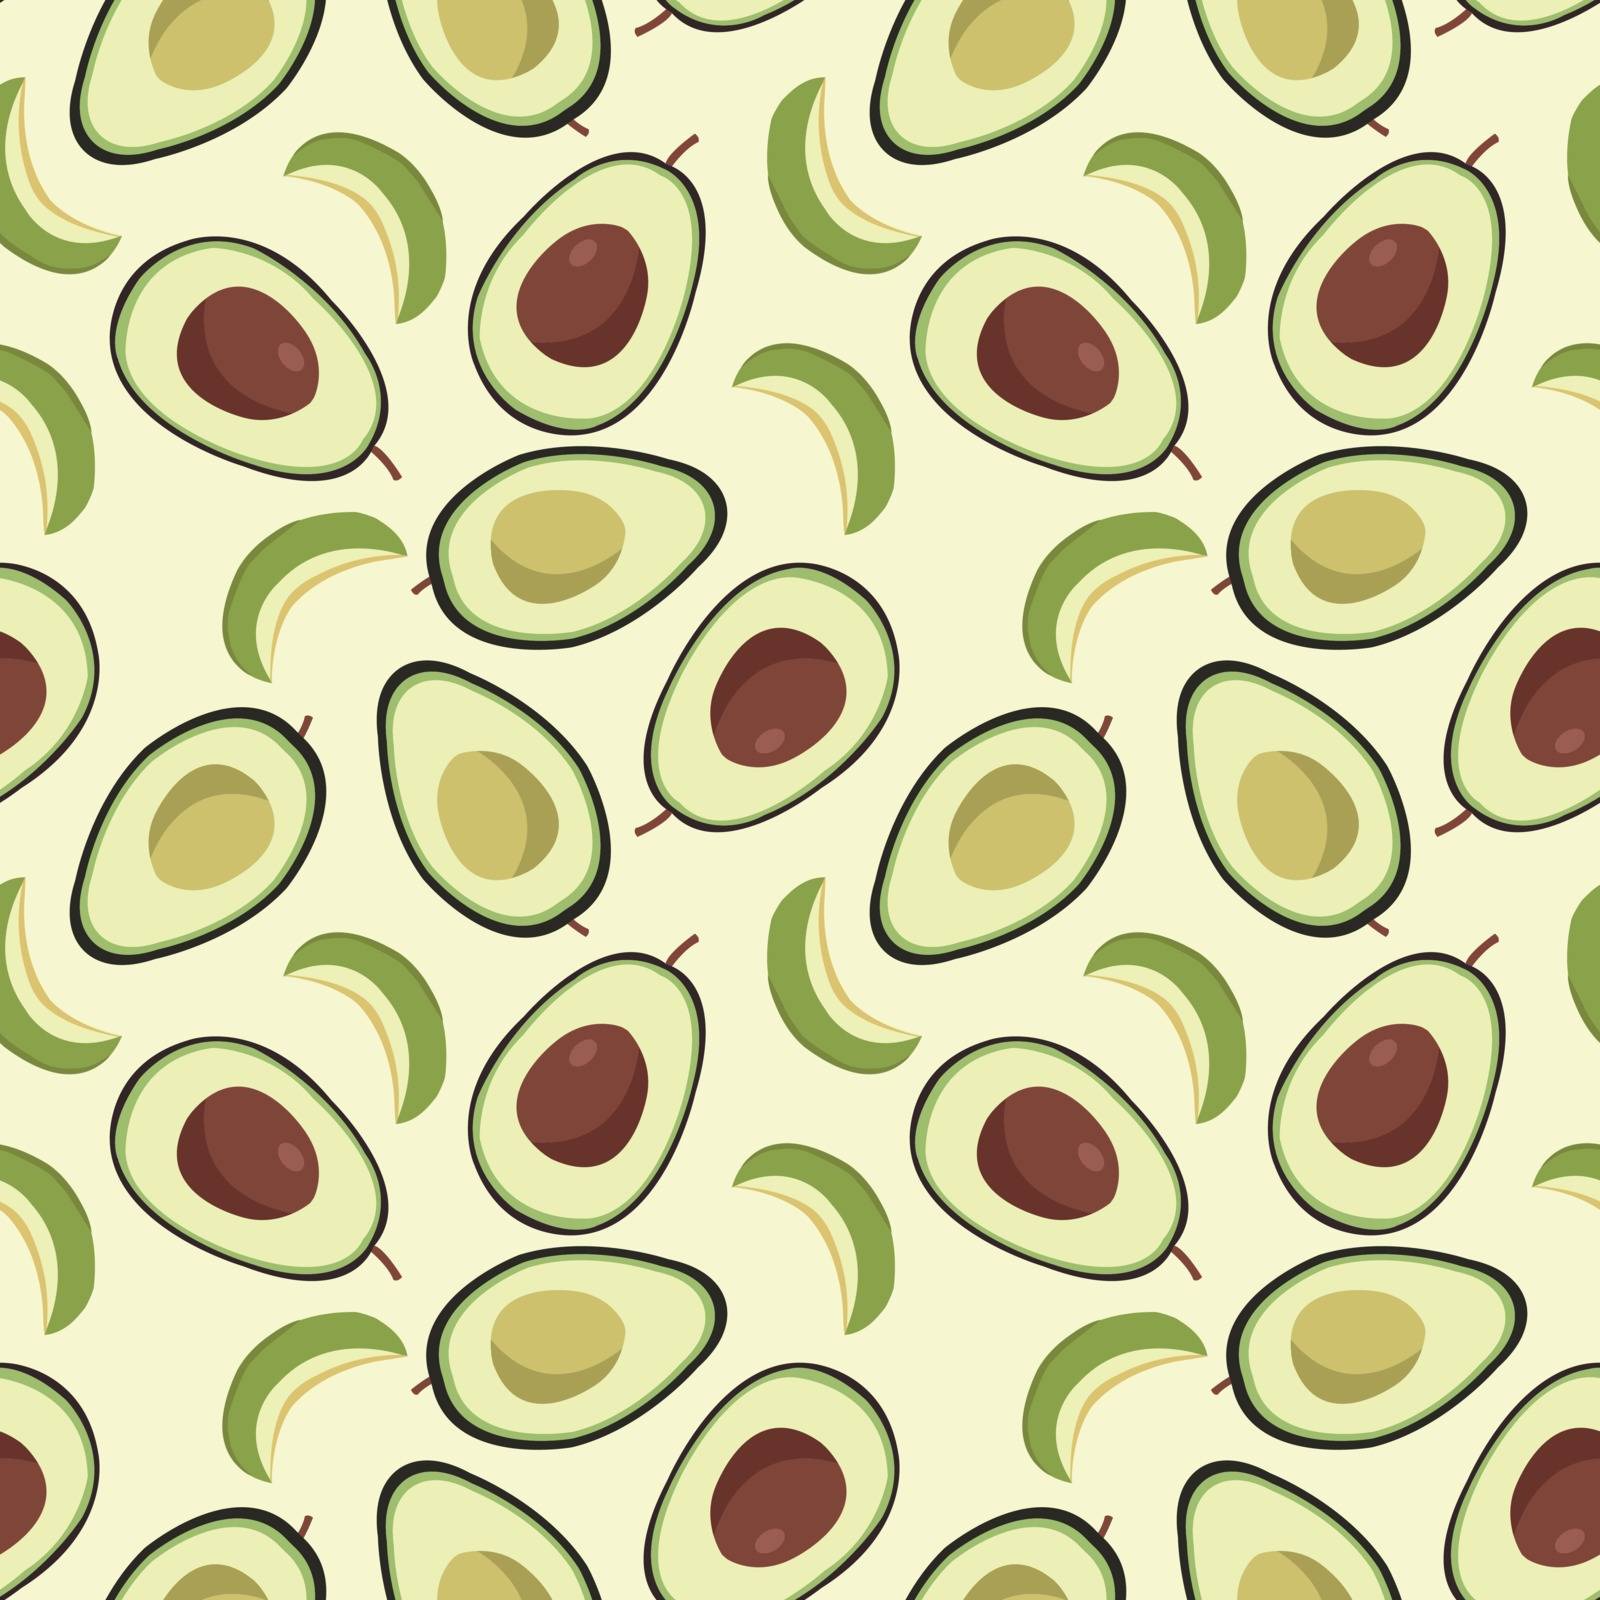 Vector Hand drawn seamless pattern with ripe green avocados. Vegetables background in flat style Texture for eco and healthy food concept.